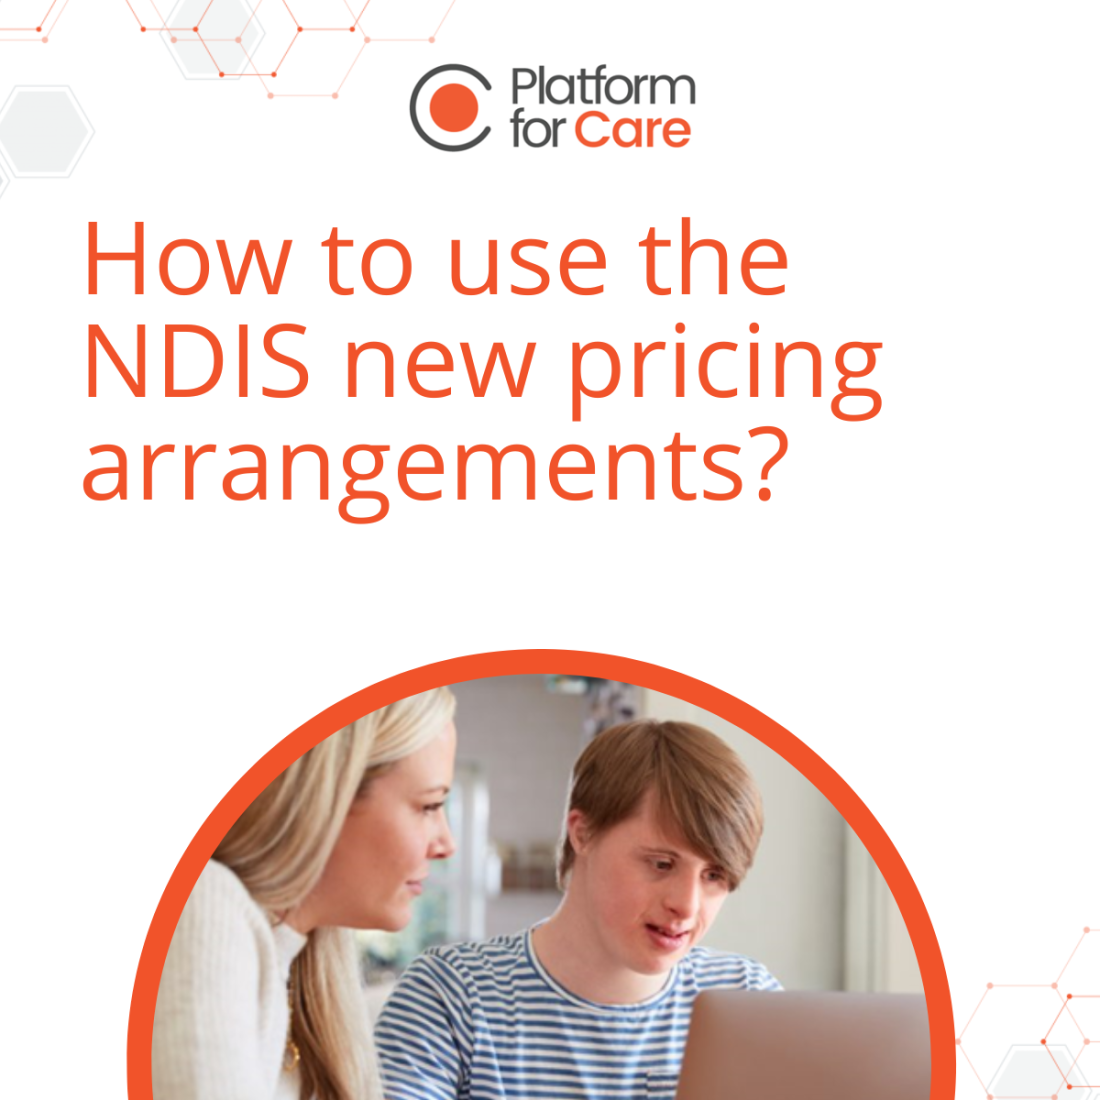 How to use the NDIS new pricing arrangements.